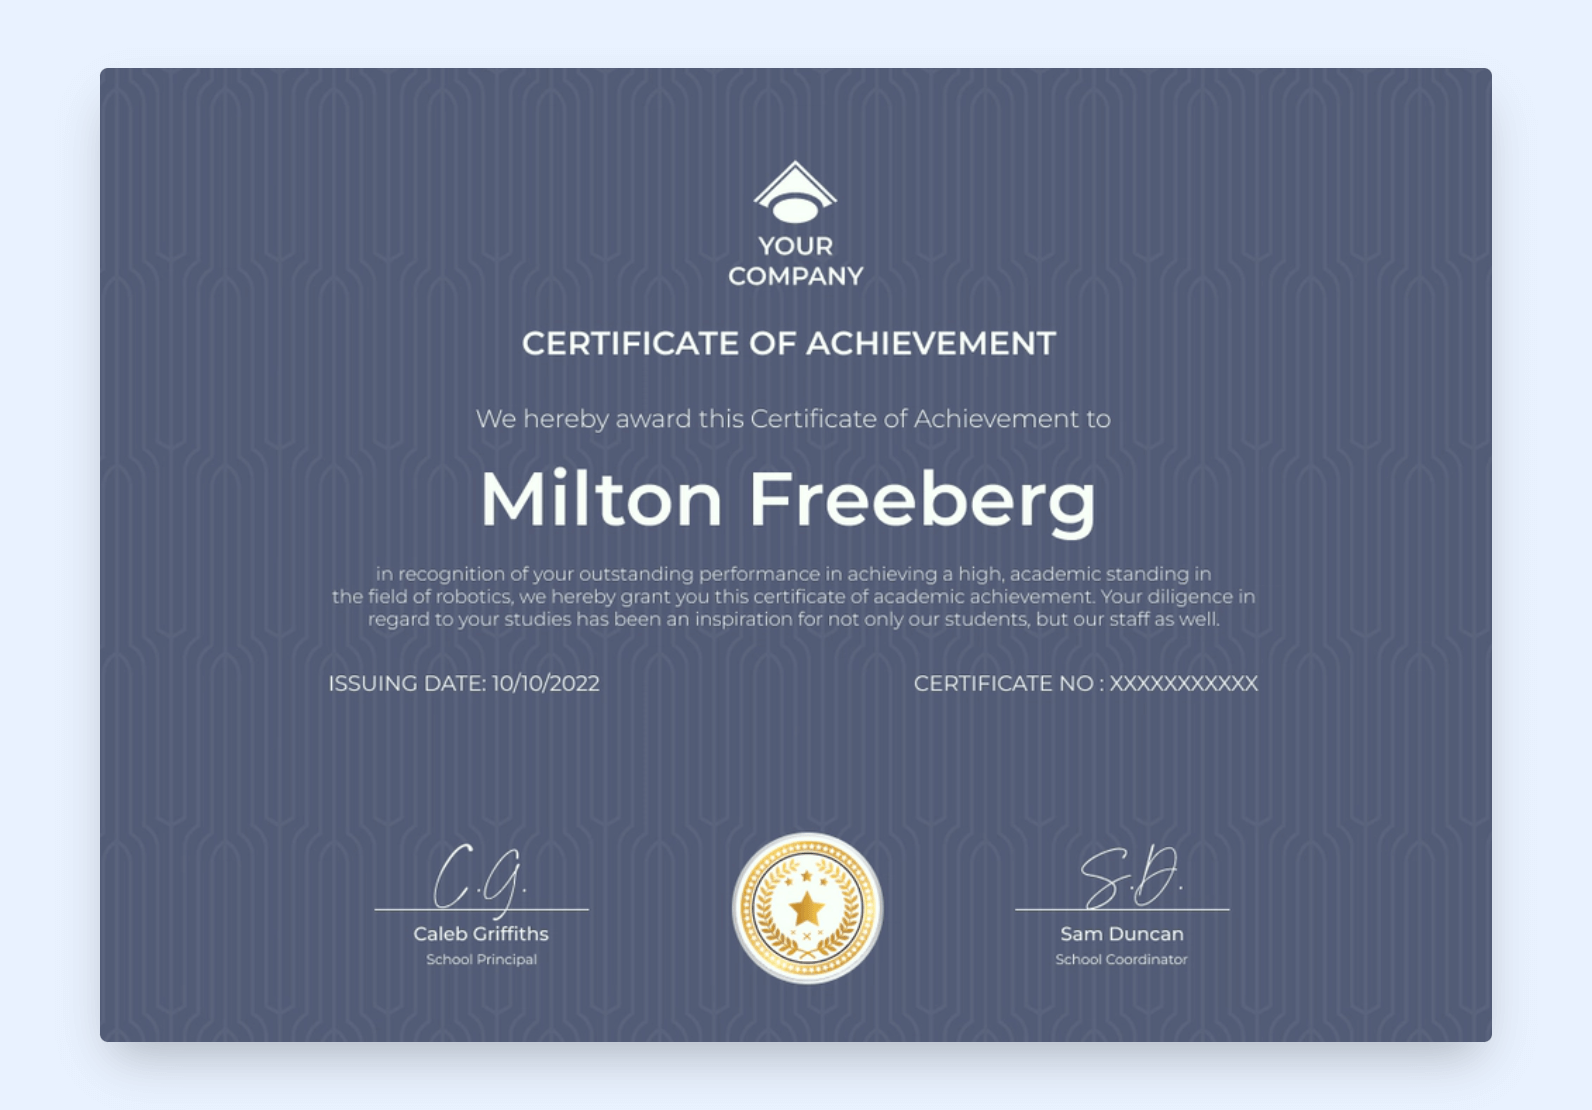 Simple Google Slides certificate with blue background.